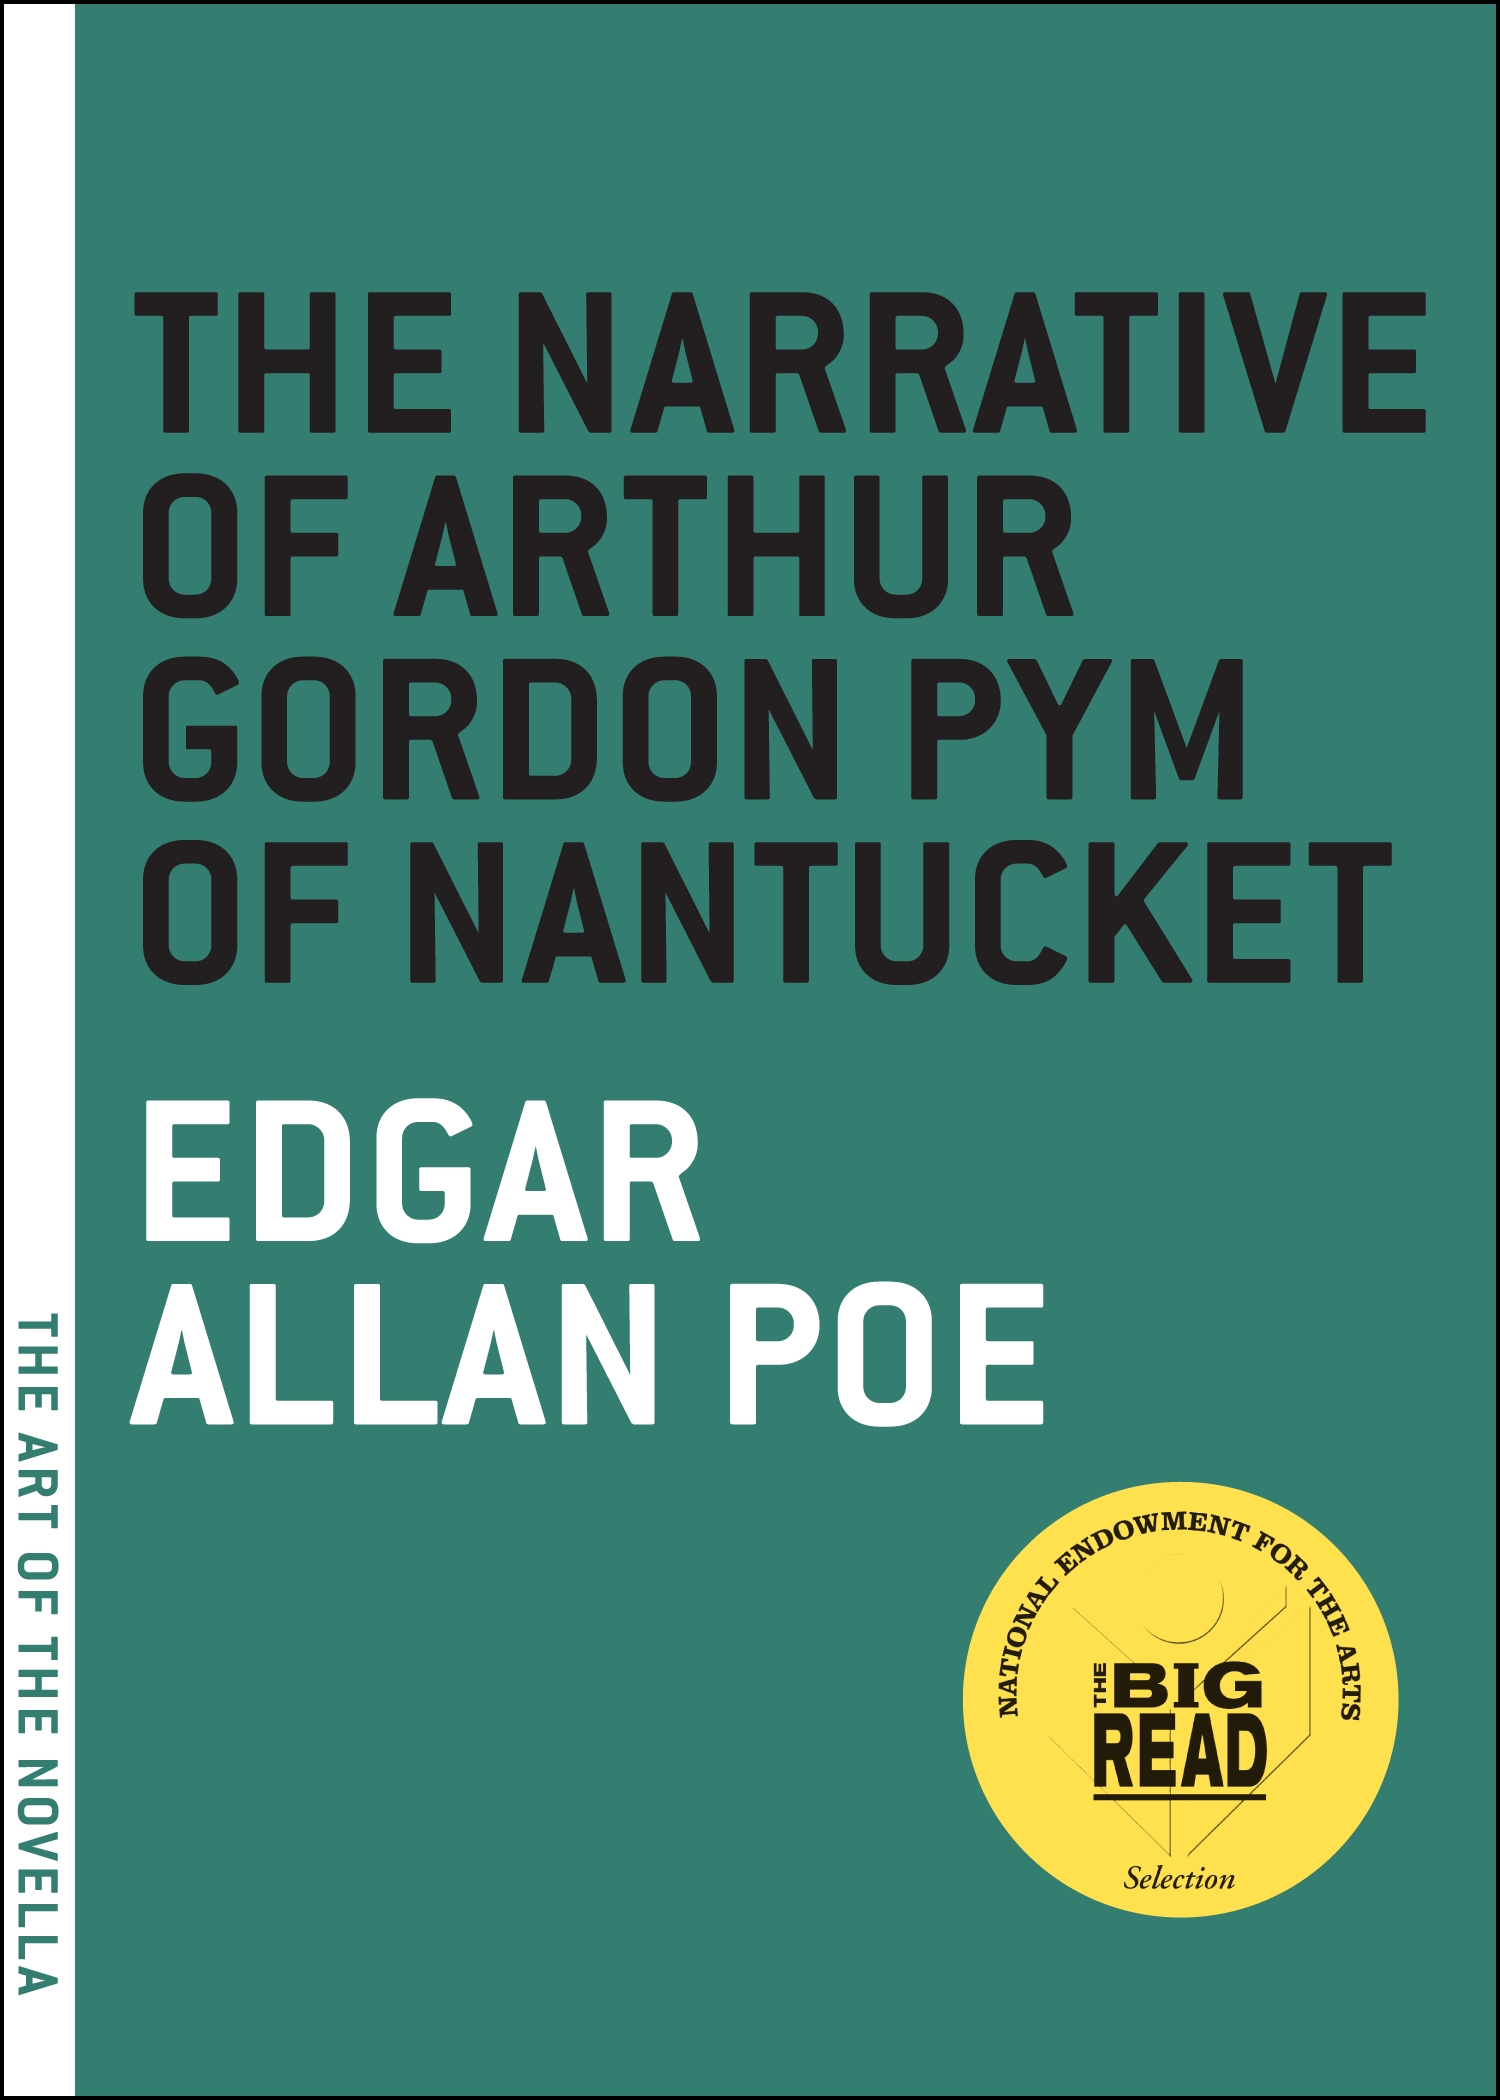 The Narrative of Arthur Gordon Pym of Nantucket and Related T... by Edgar Allan Poe